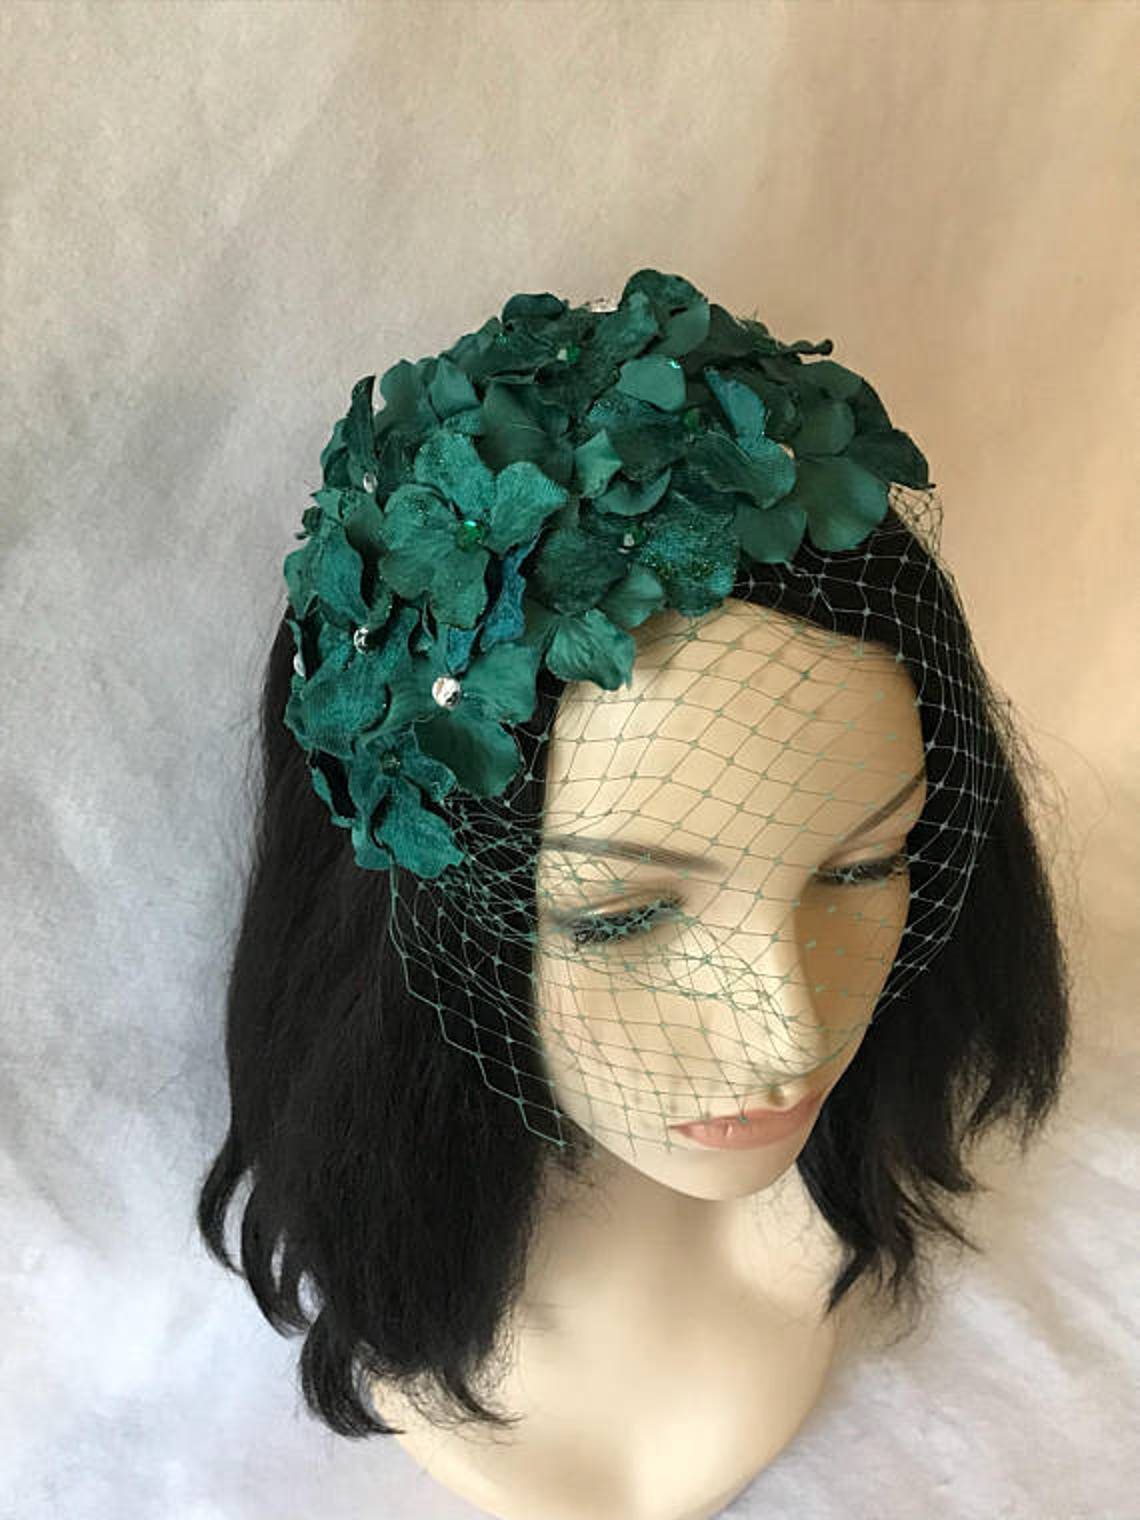 Emerald Green Vintage style 1950s 1960s Half Hat with veil | Etsy